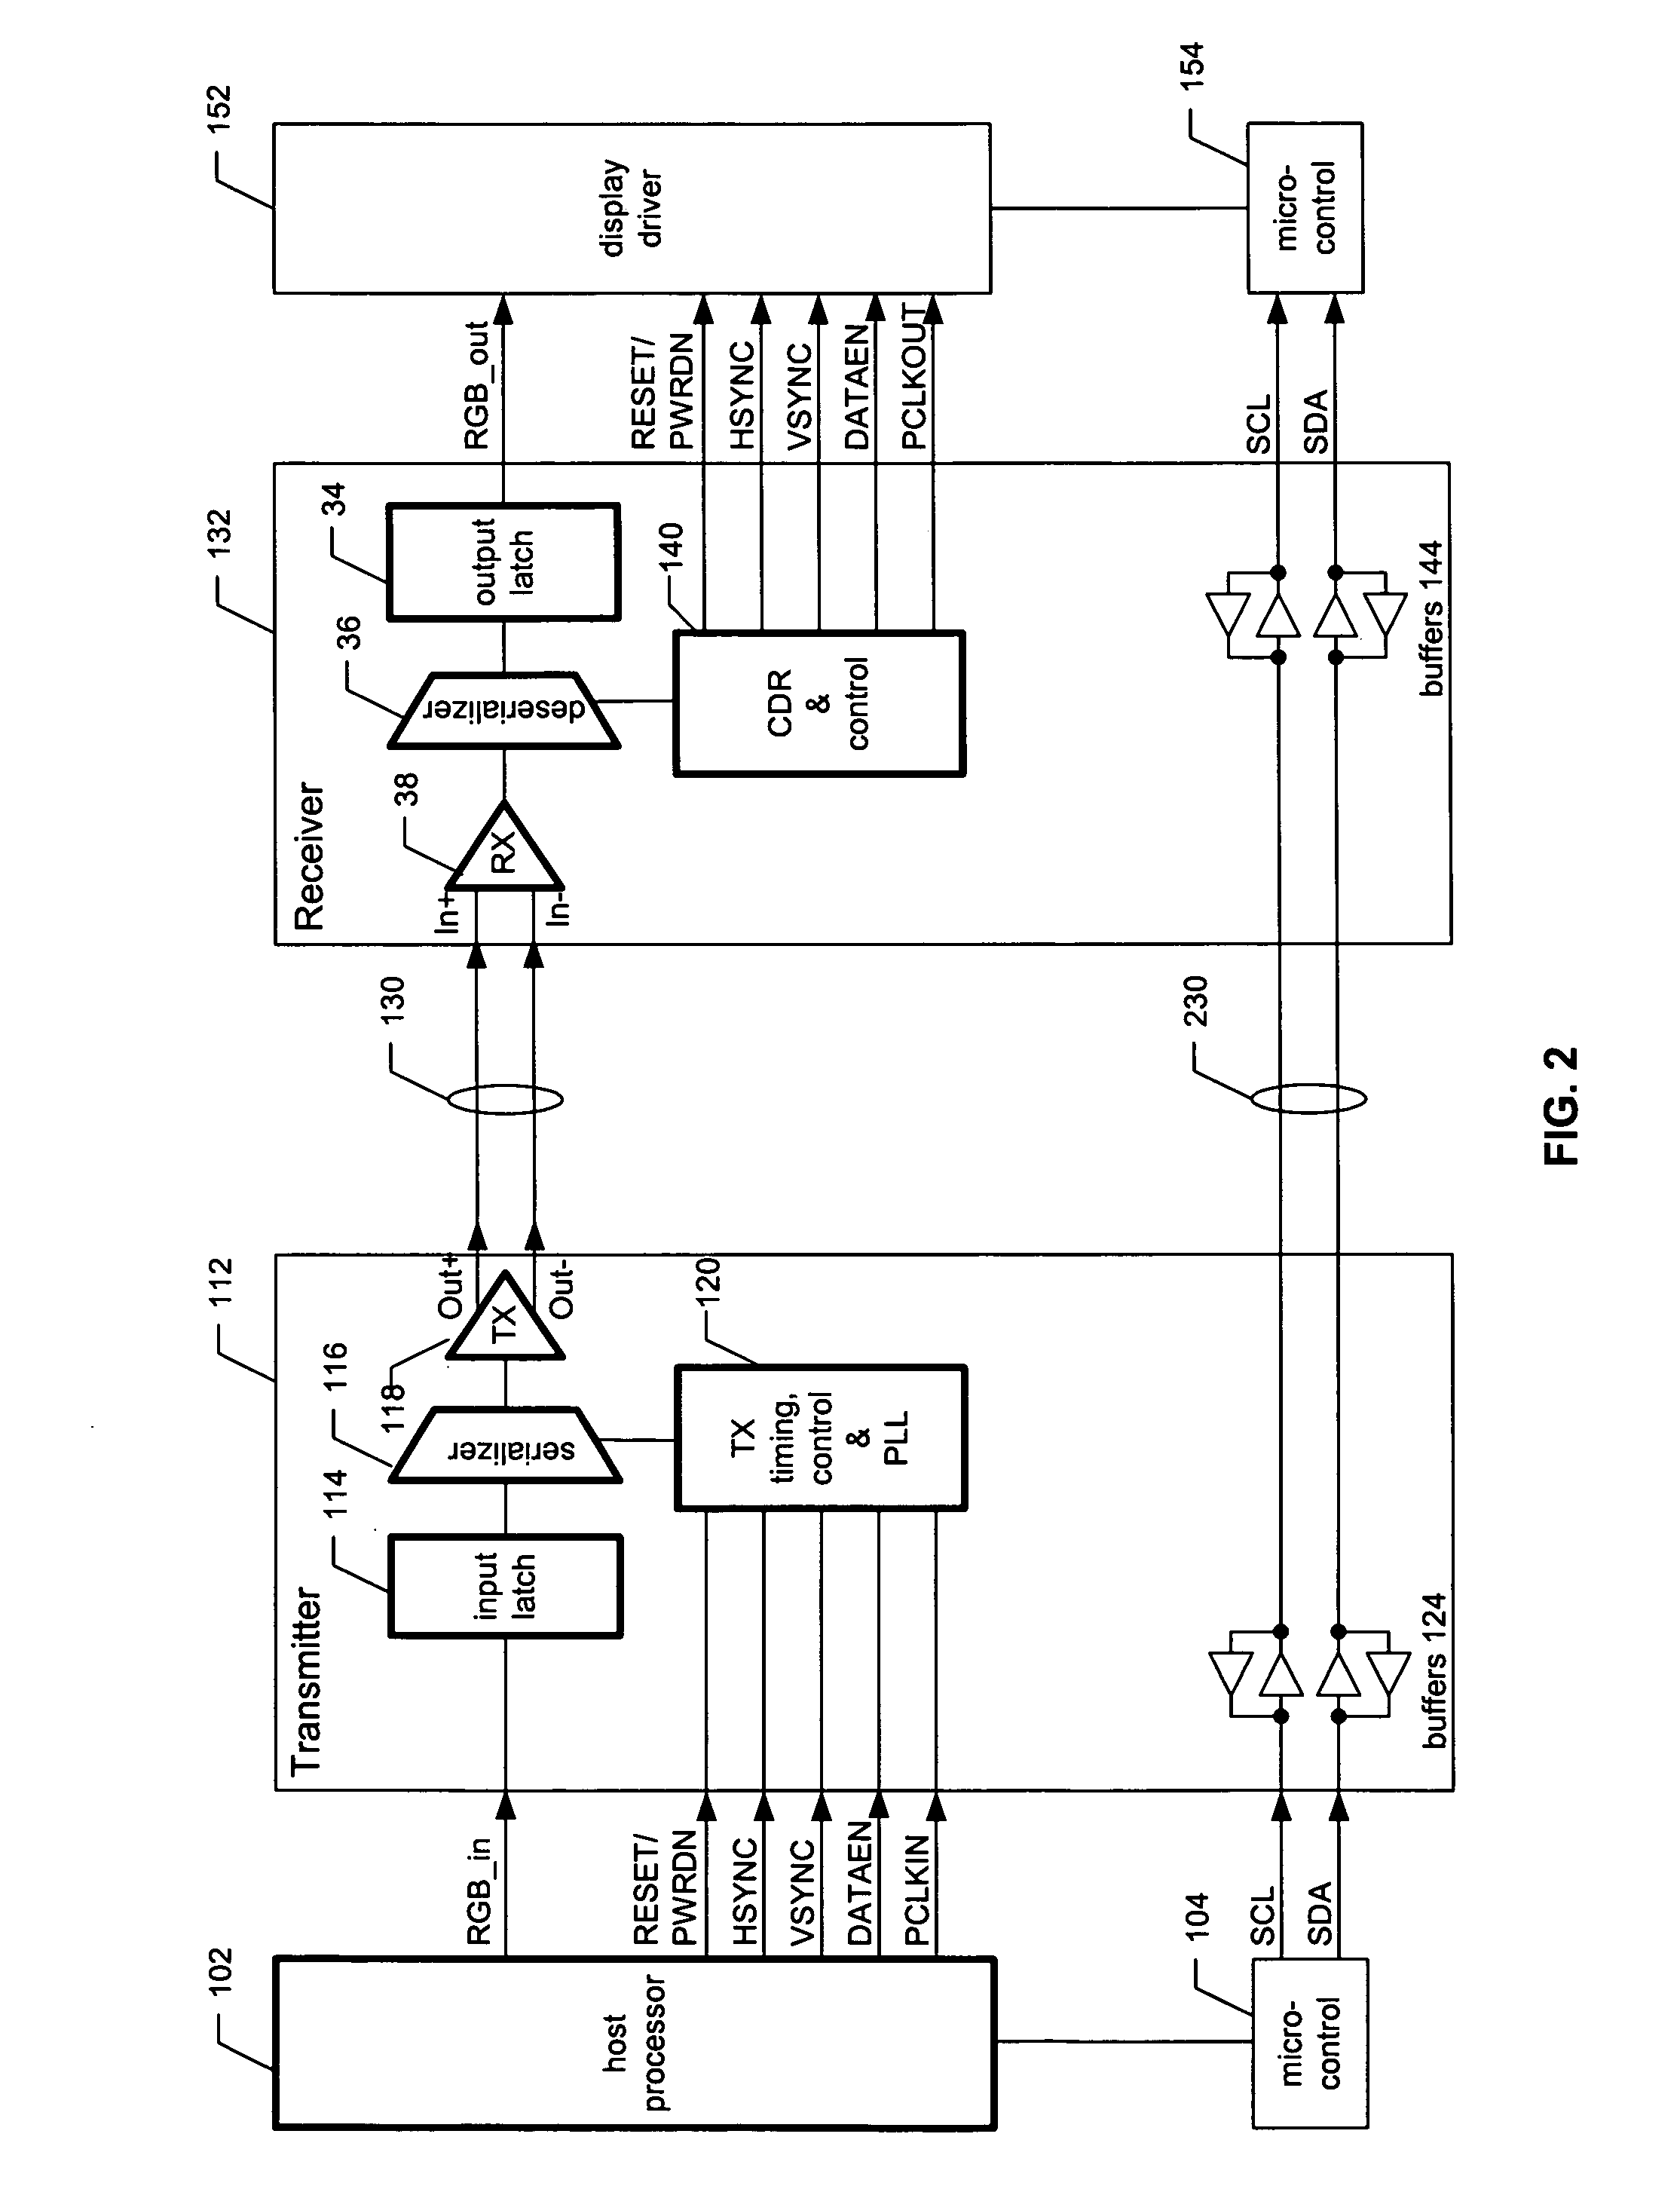 Use of differential pair as single-ended data paths to transport low speed data